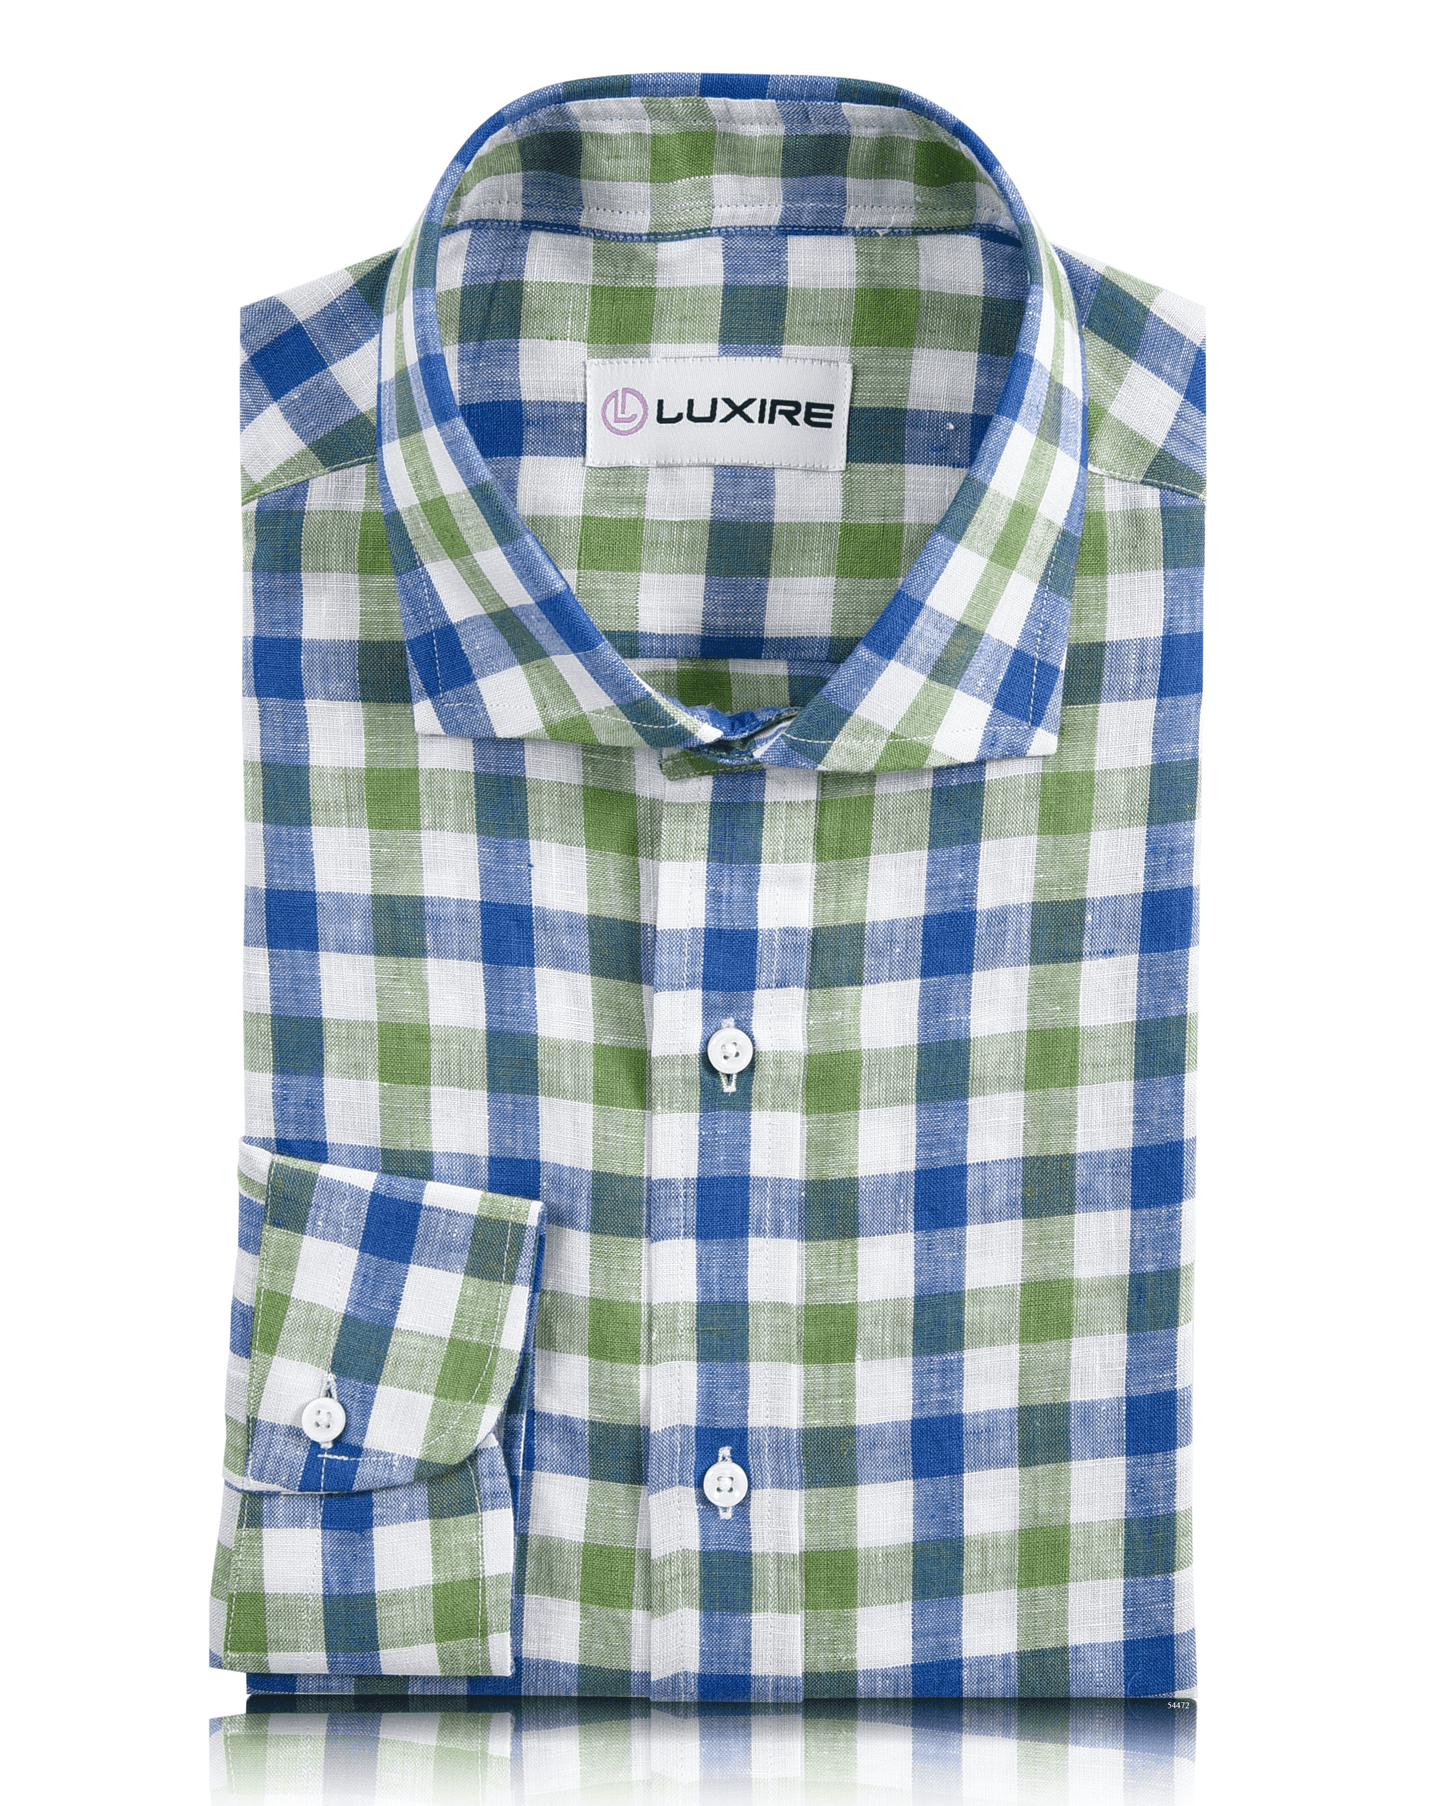 Front view of custom linen shirt for men by Luxire in green and blue gingham